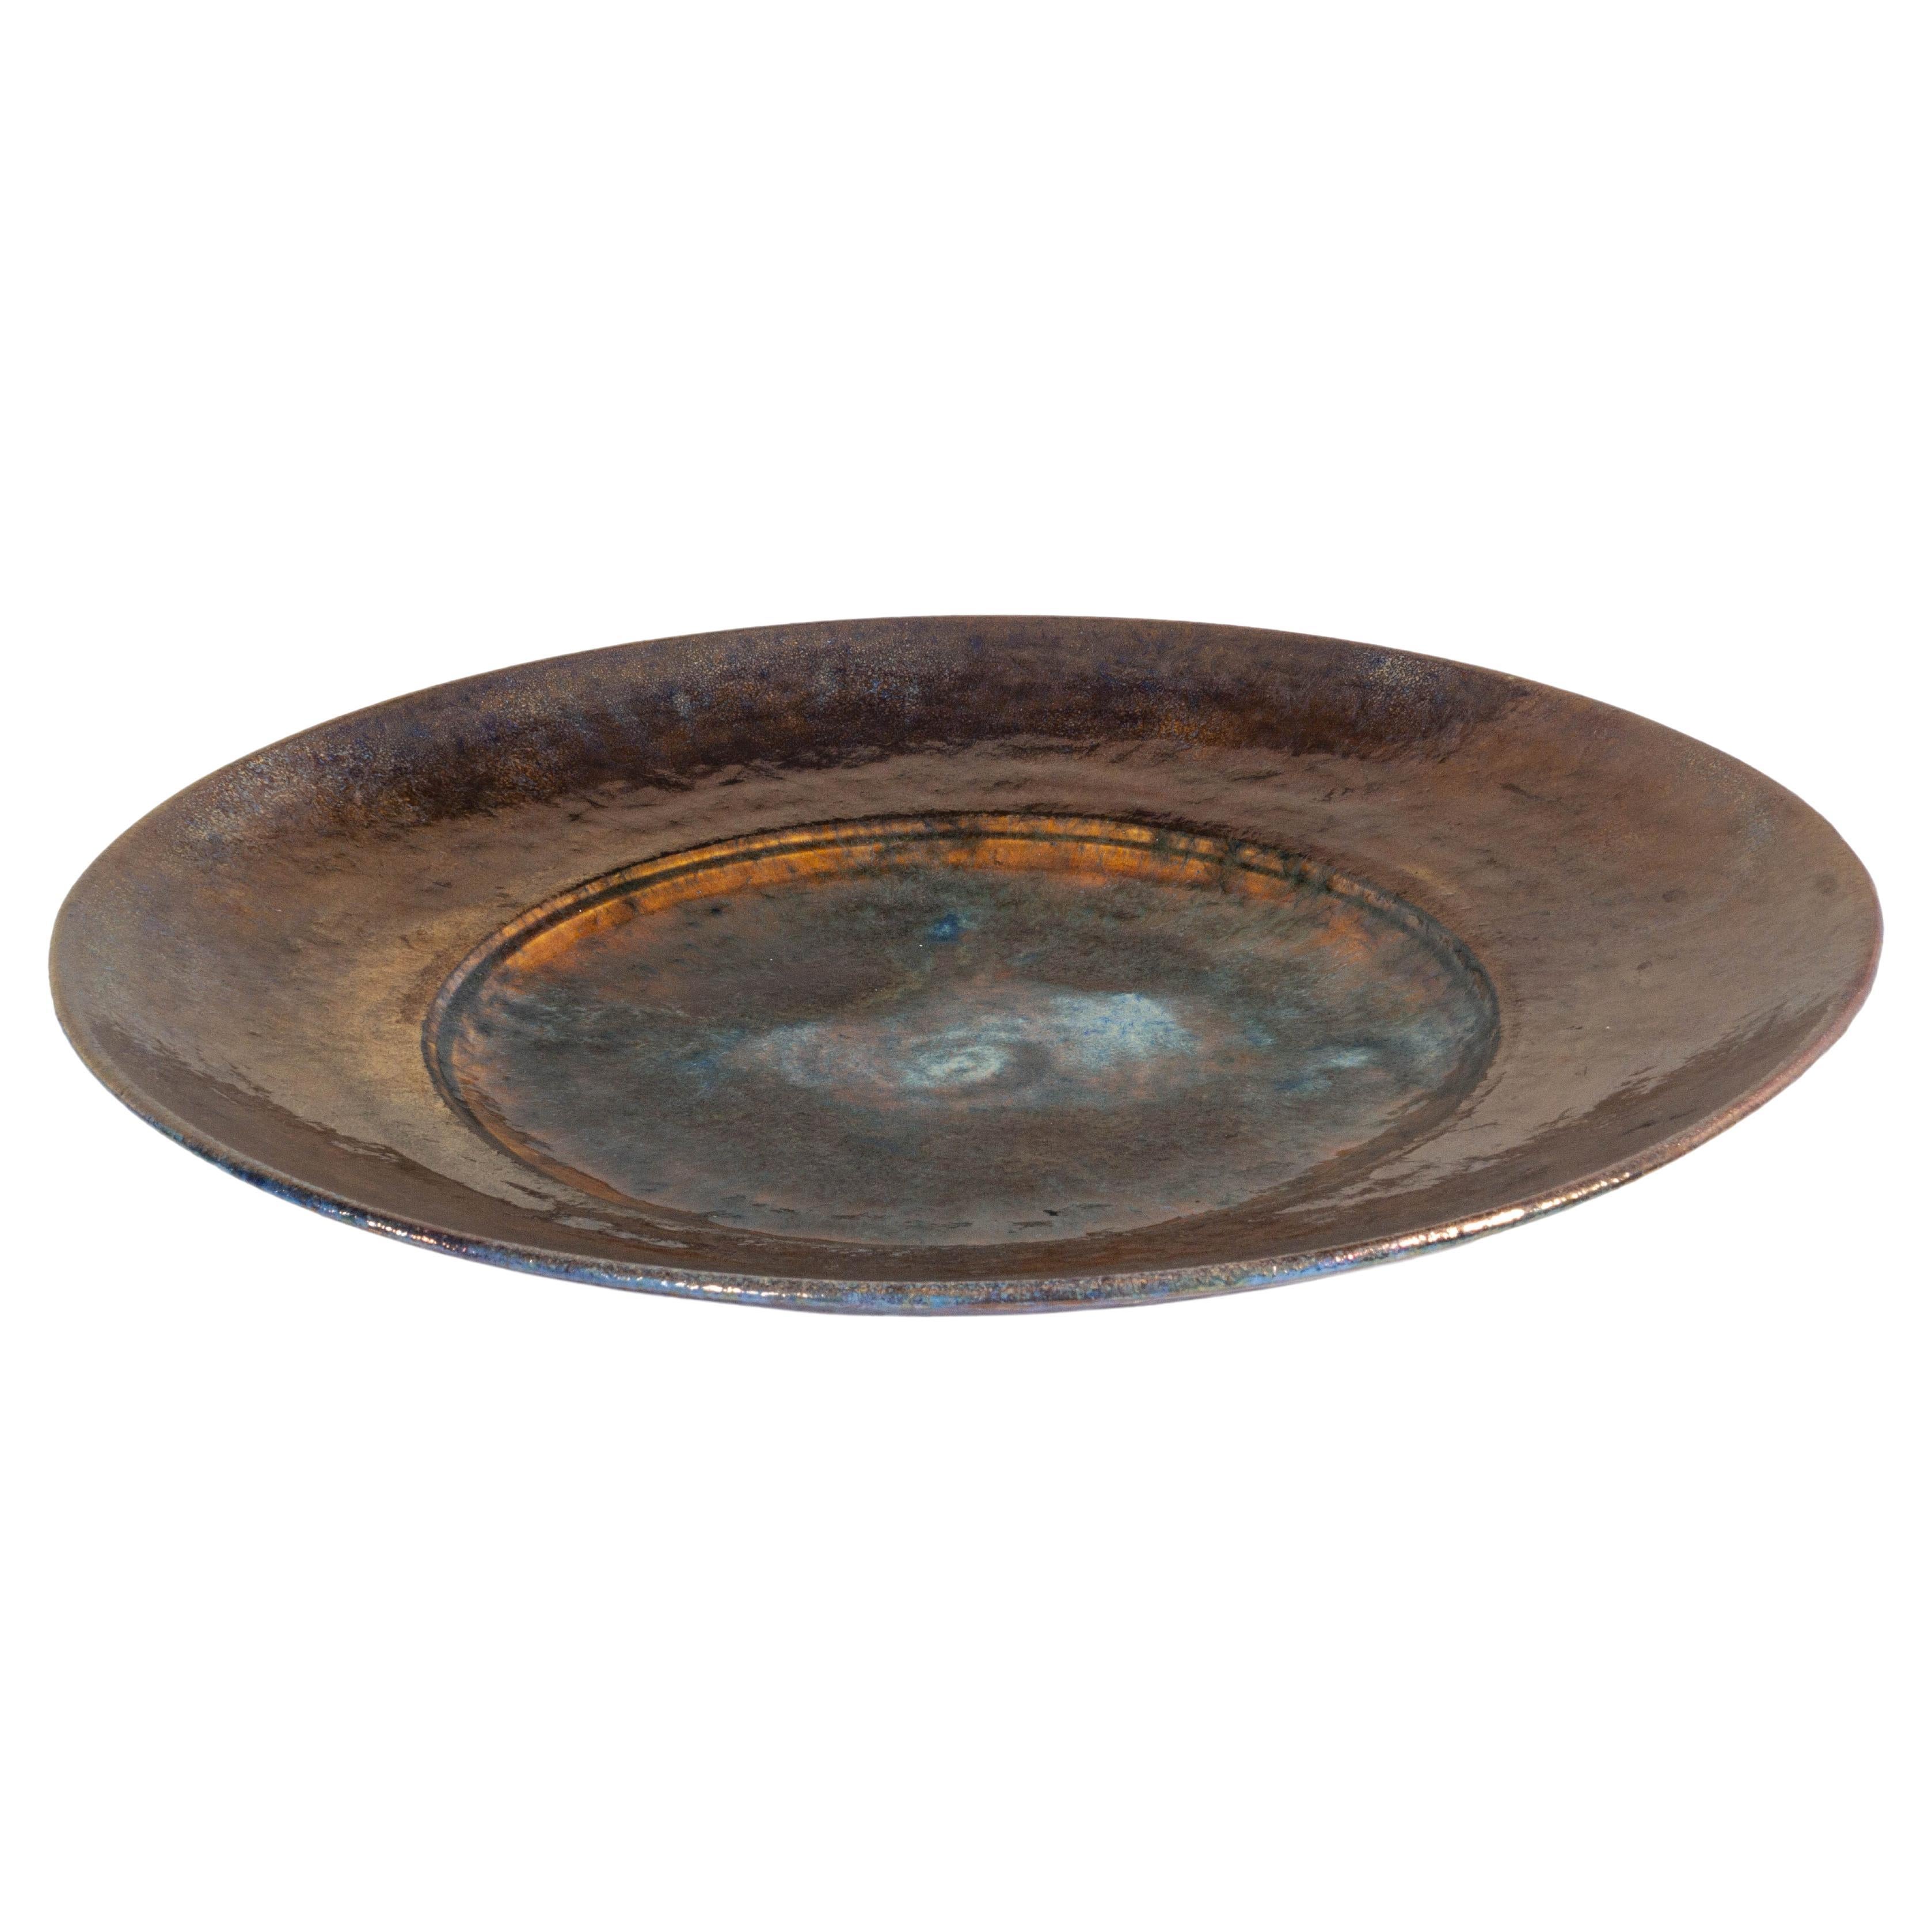 Monumental Studio Art Pottery Charger